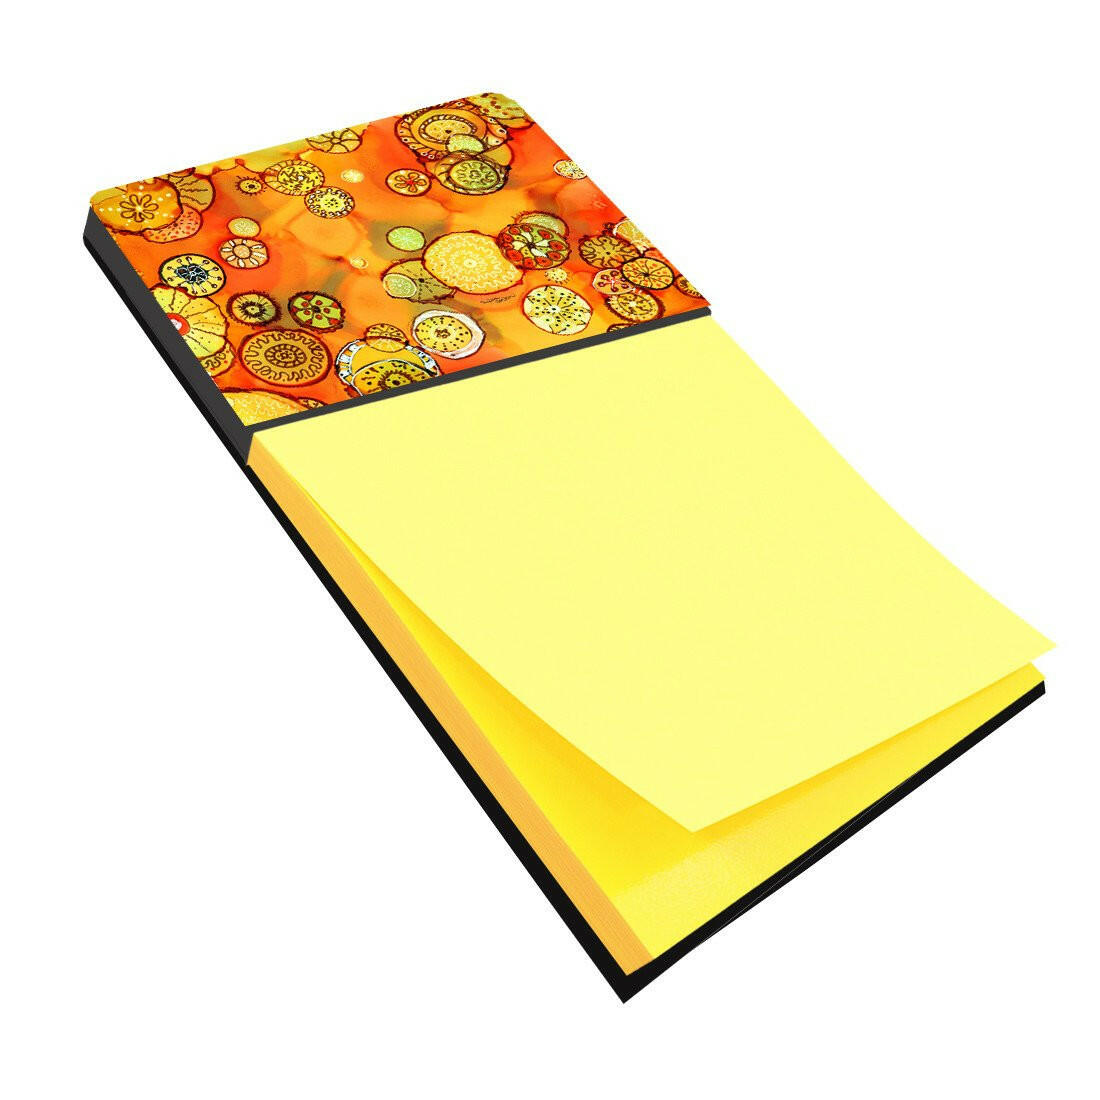 Abstract Flowers in Oranges and Yellows Sticky Note Holder 8987SN by Caroline's Treasures